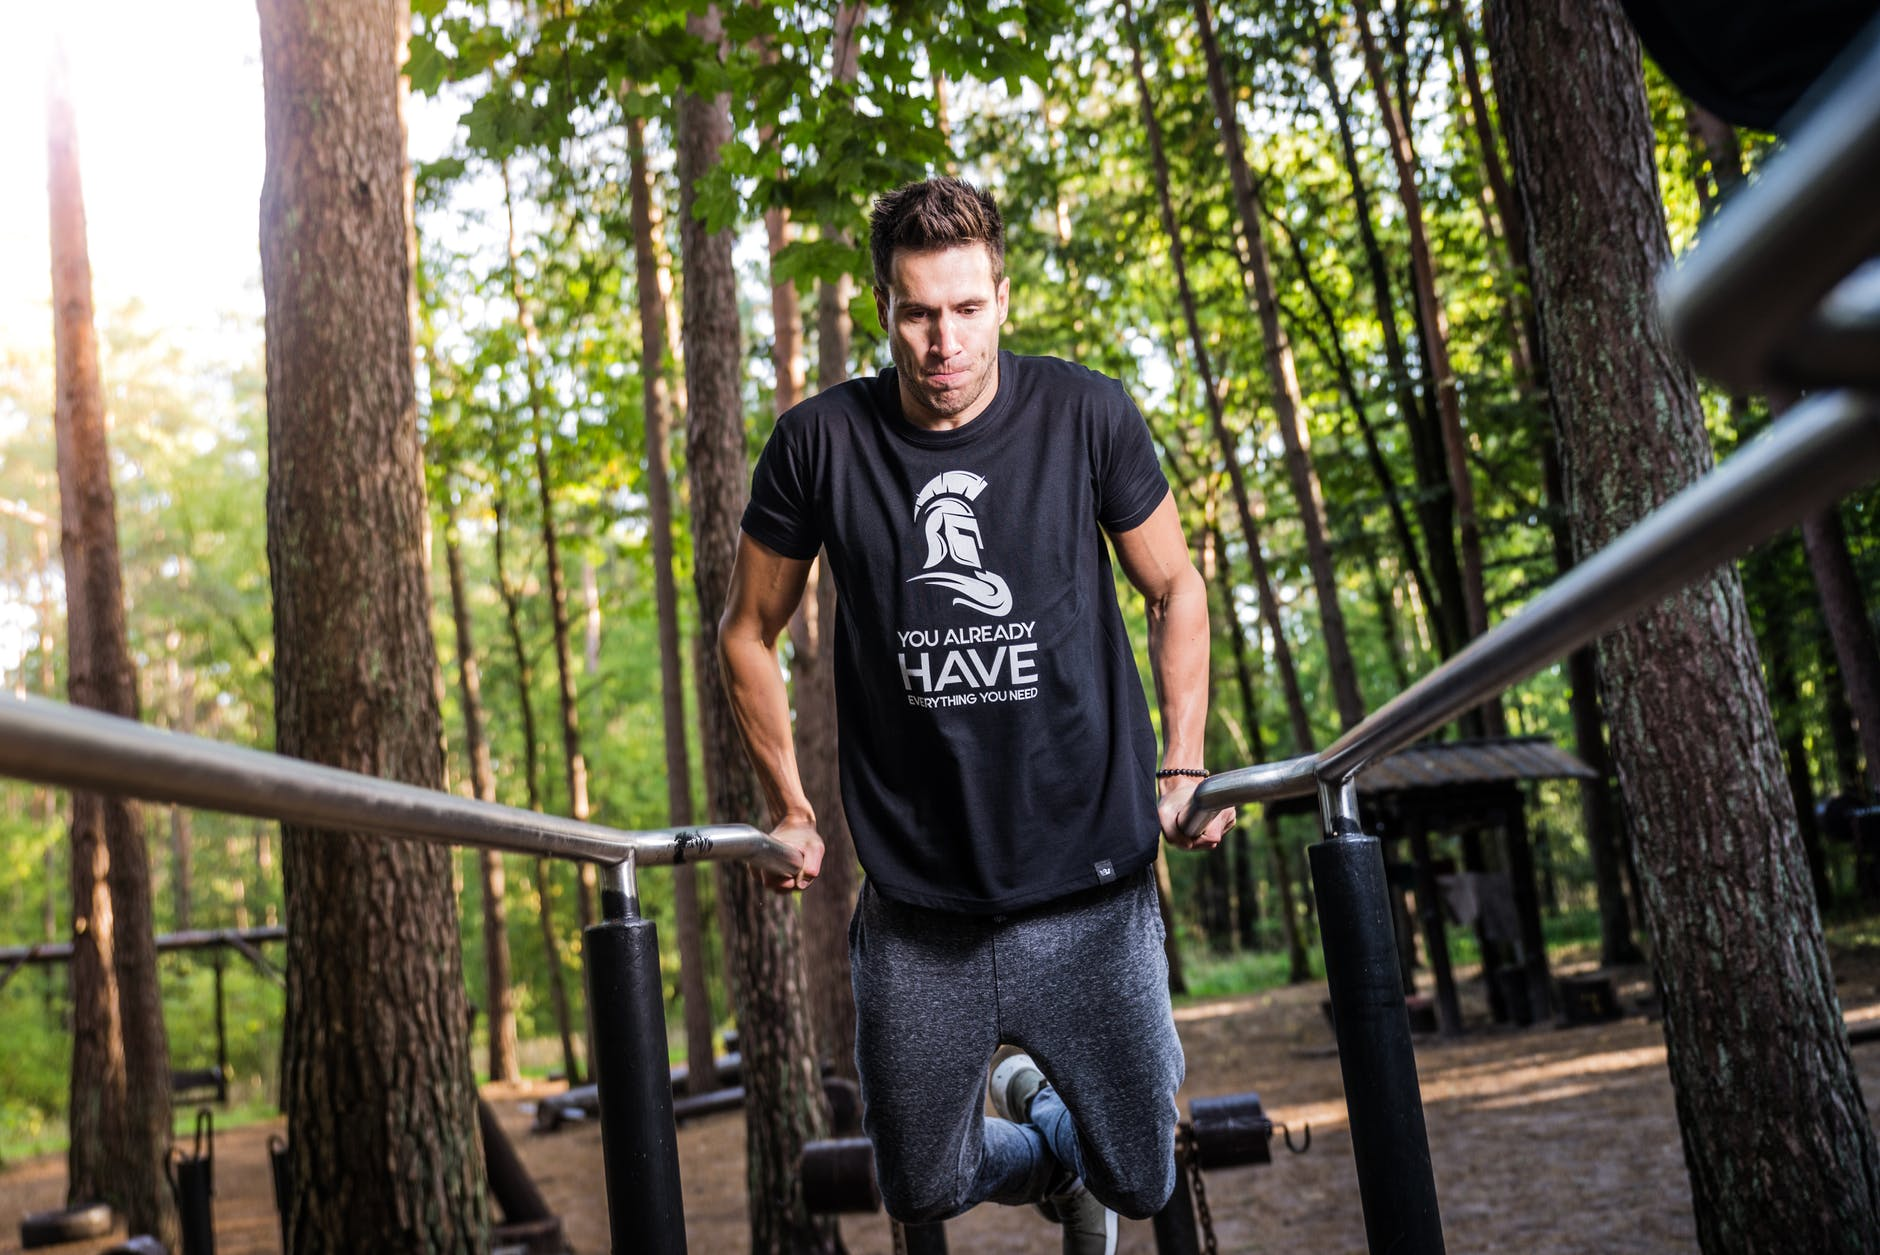 Calisthenics Workouts: Why Everyone Should Be Doing It